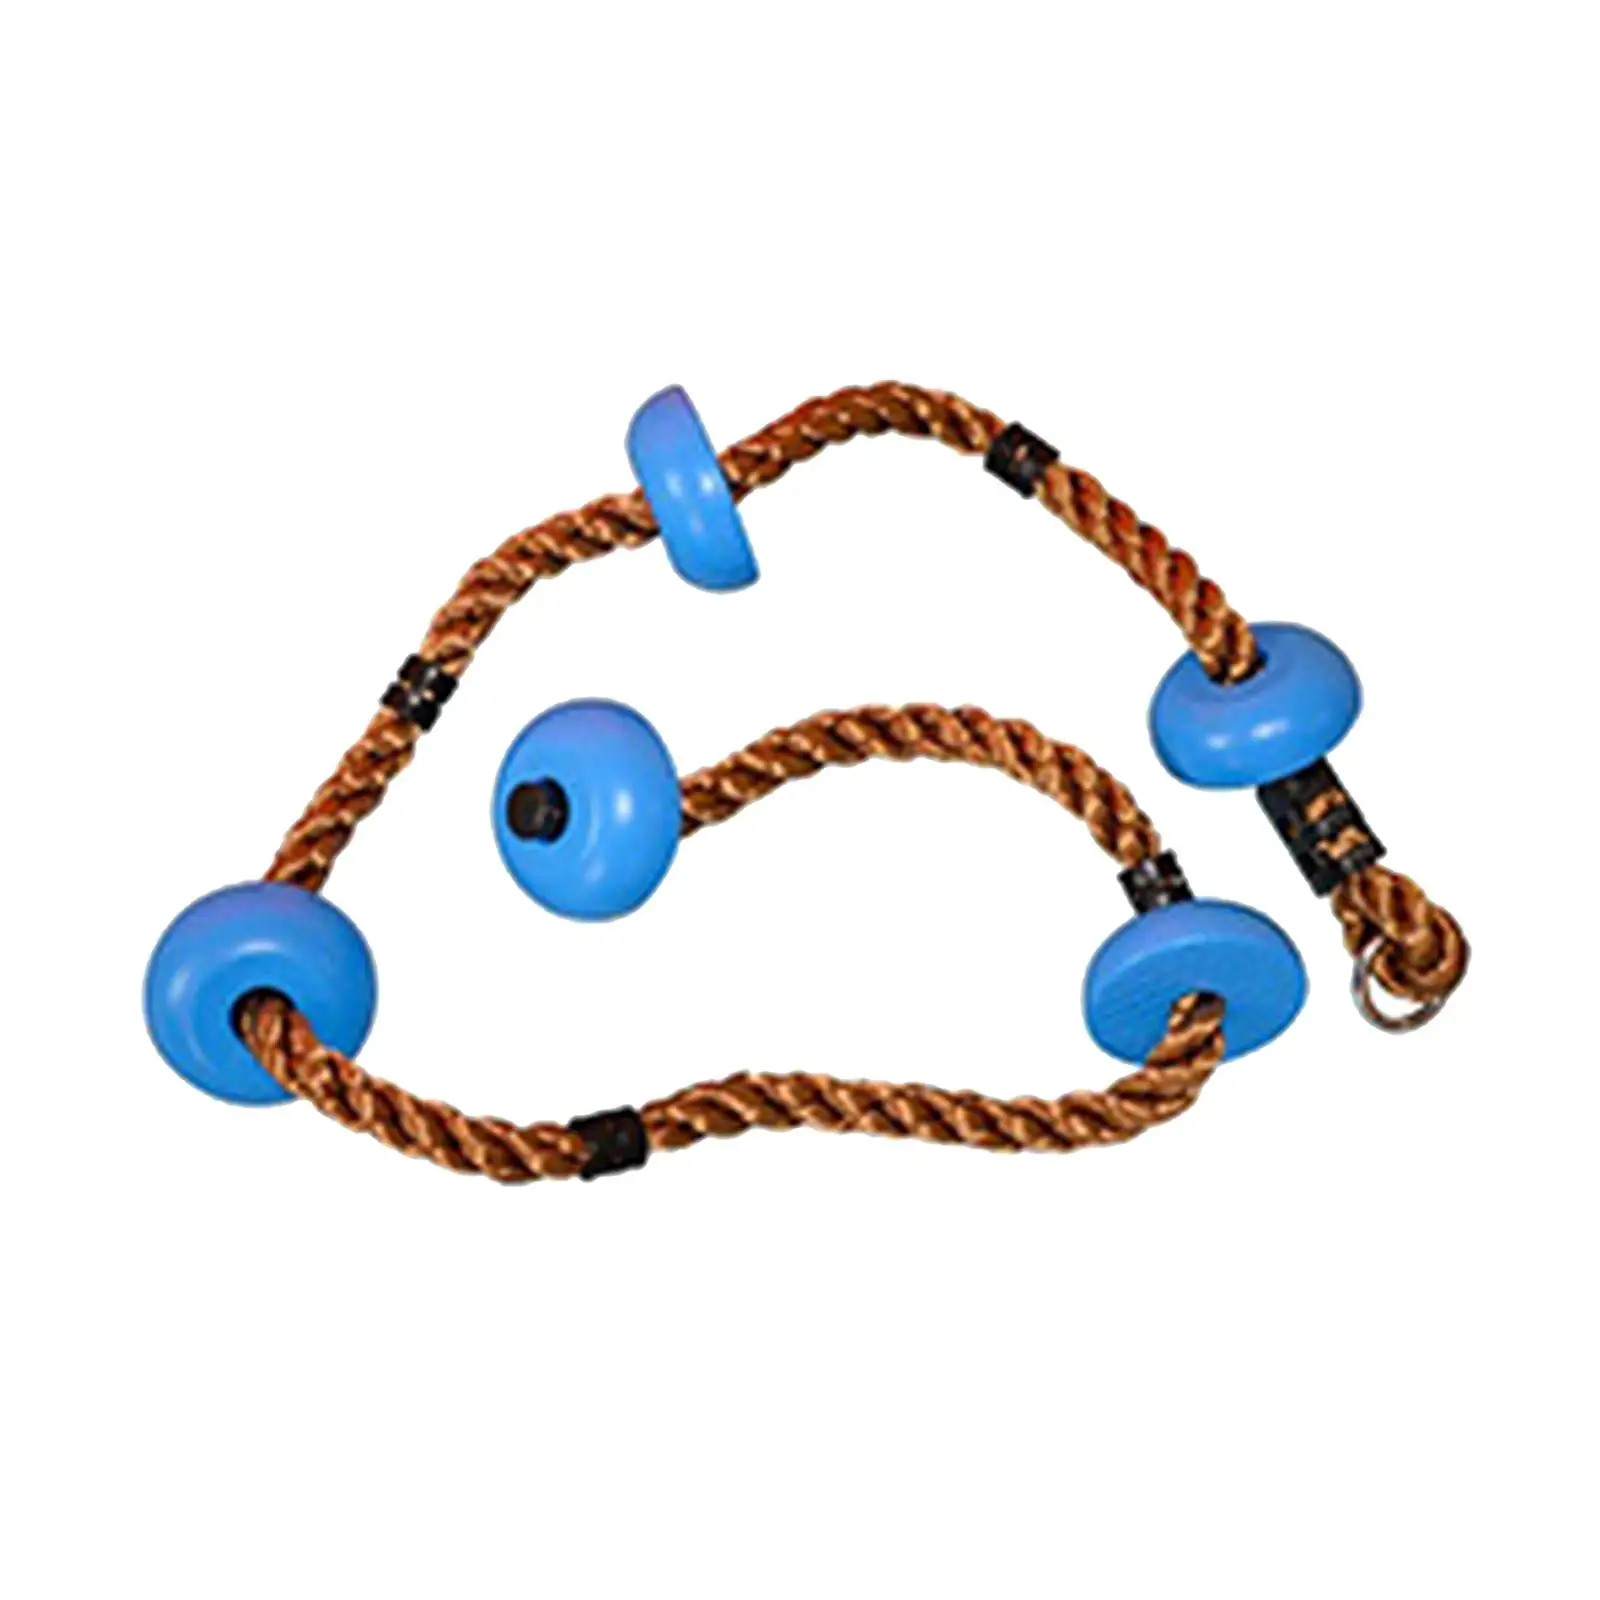 Climbing Rope Equipment Accessories Disc Props Sports Games Rope Ladder Swing for Garden Gym Playground Exercise Kids